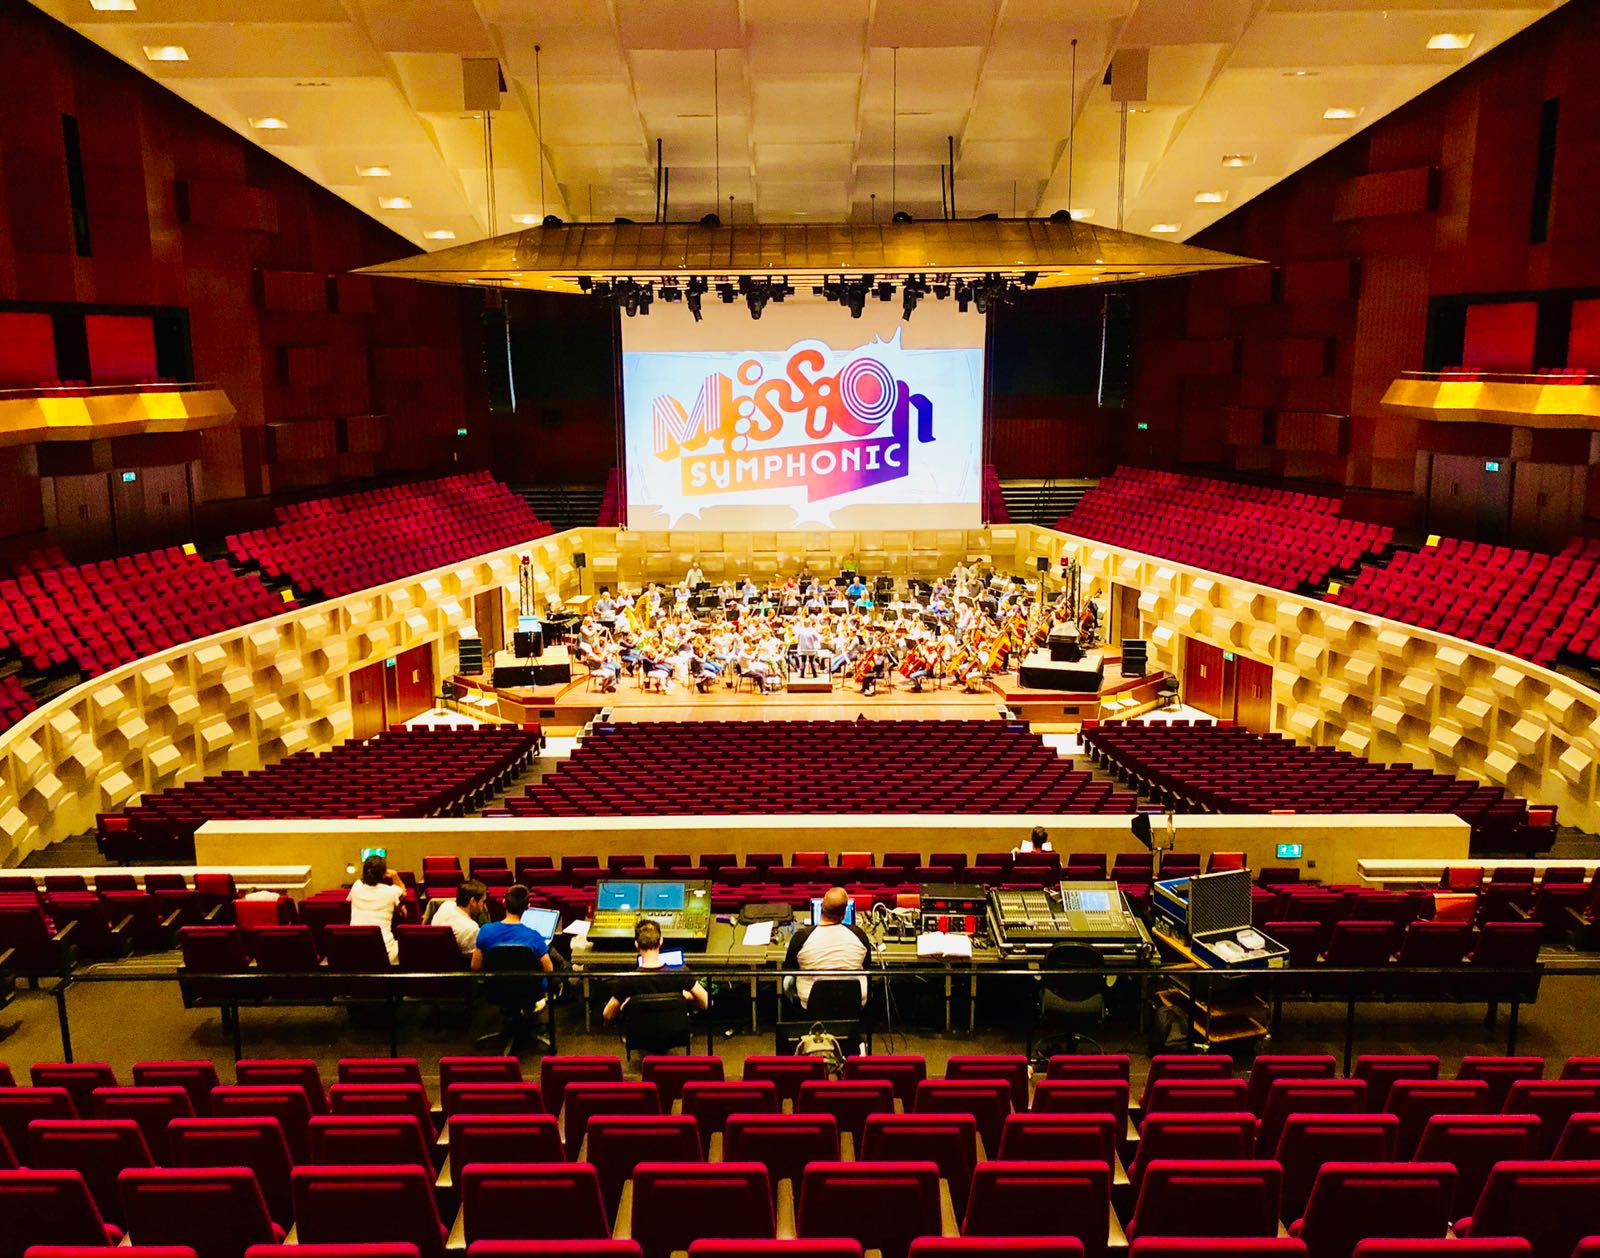 Mission Symphonic for Rotterdam Philharmonic Orchestra